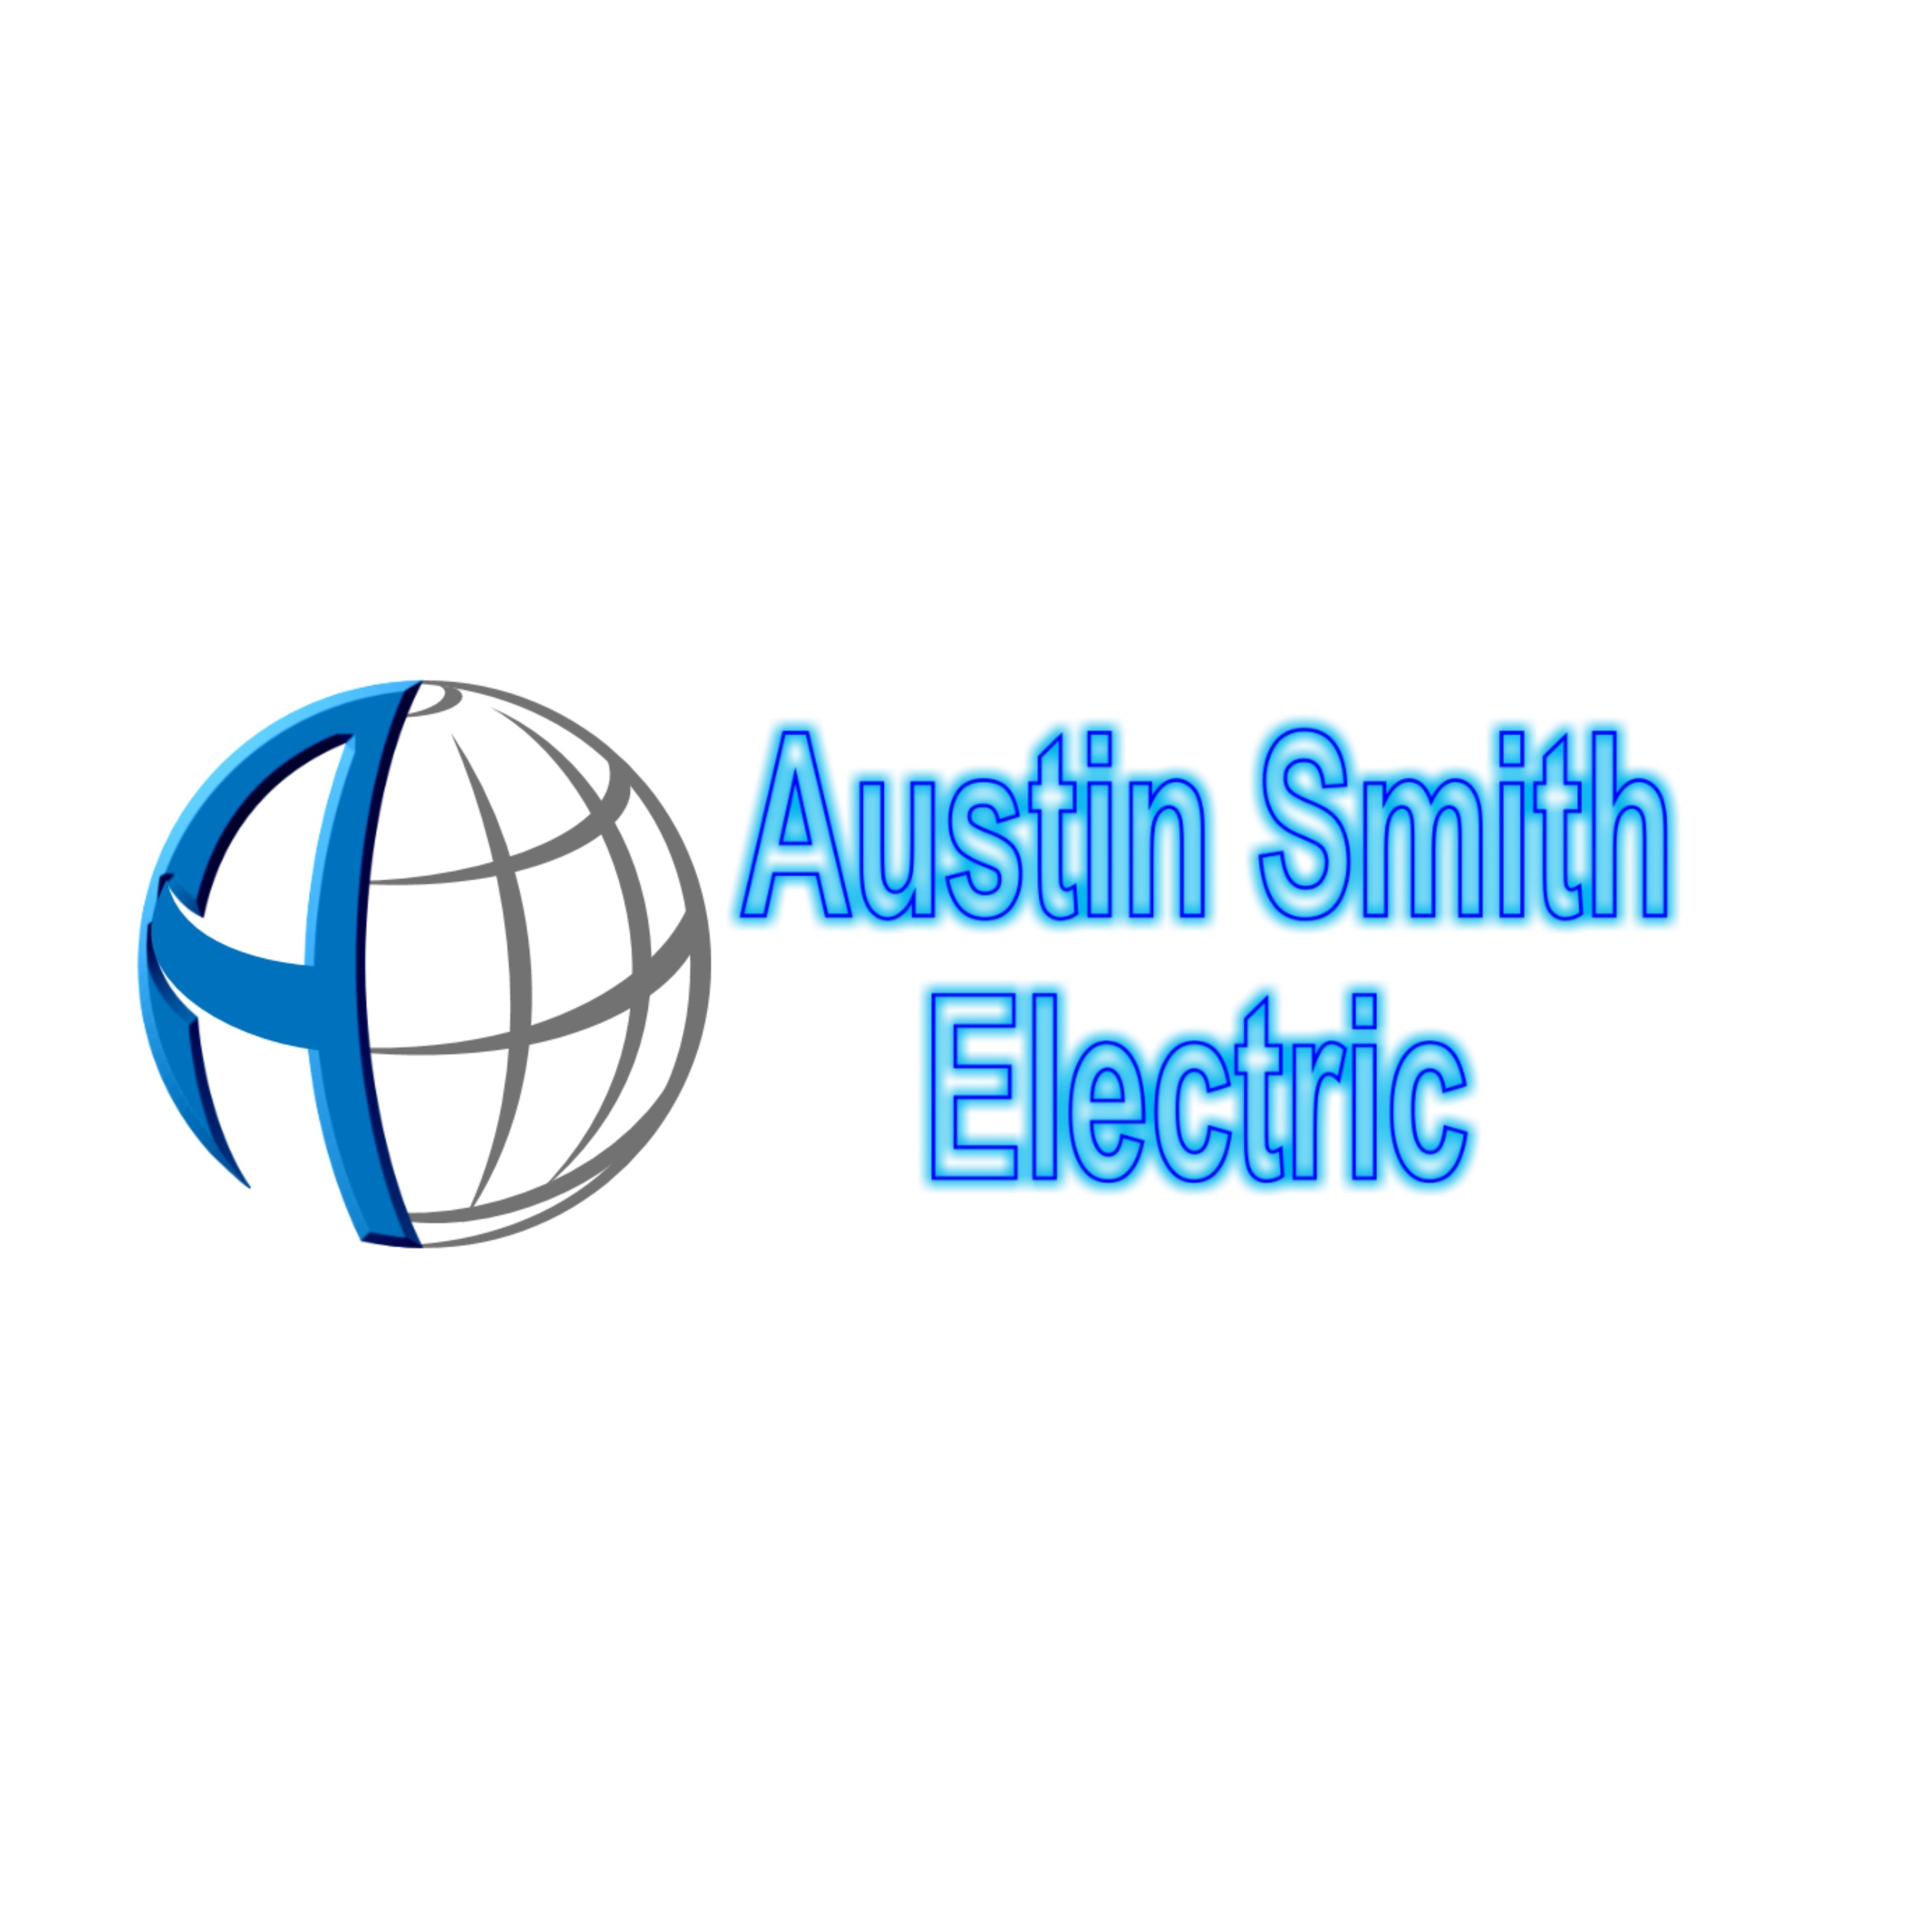 Austin Smith Electric - Indianapolis, IN 46237 - (317)970-0301 | ShowMeLocal.com